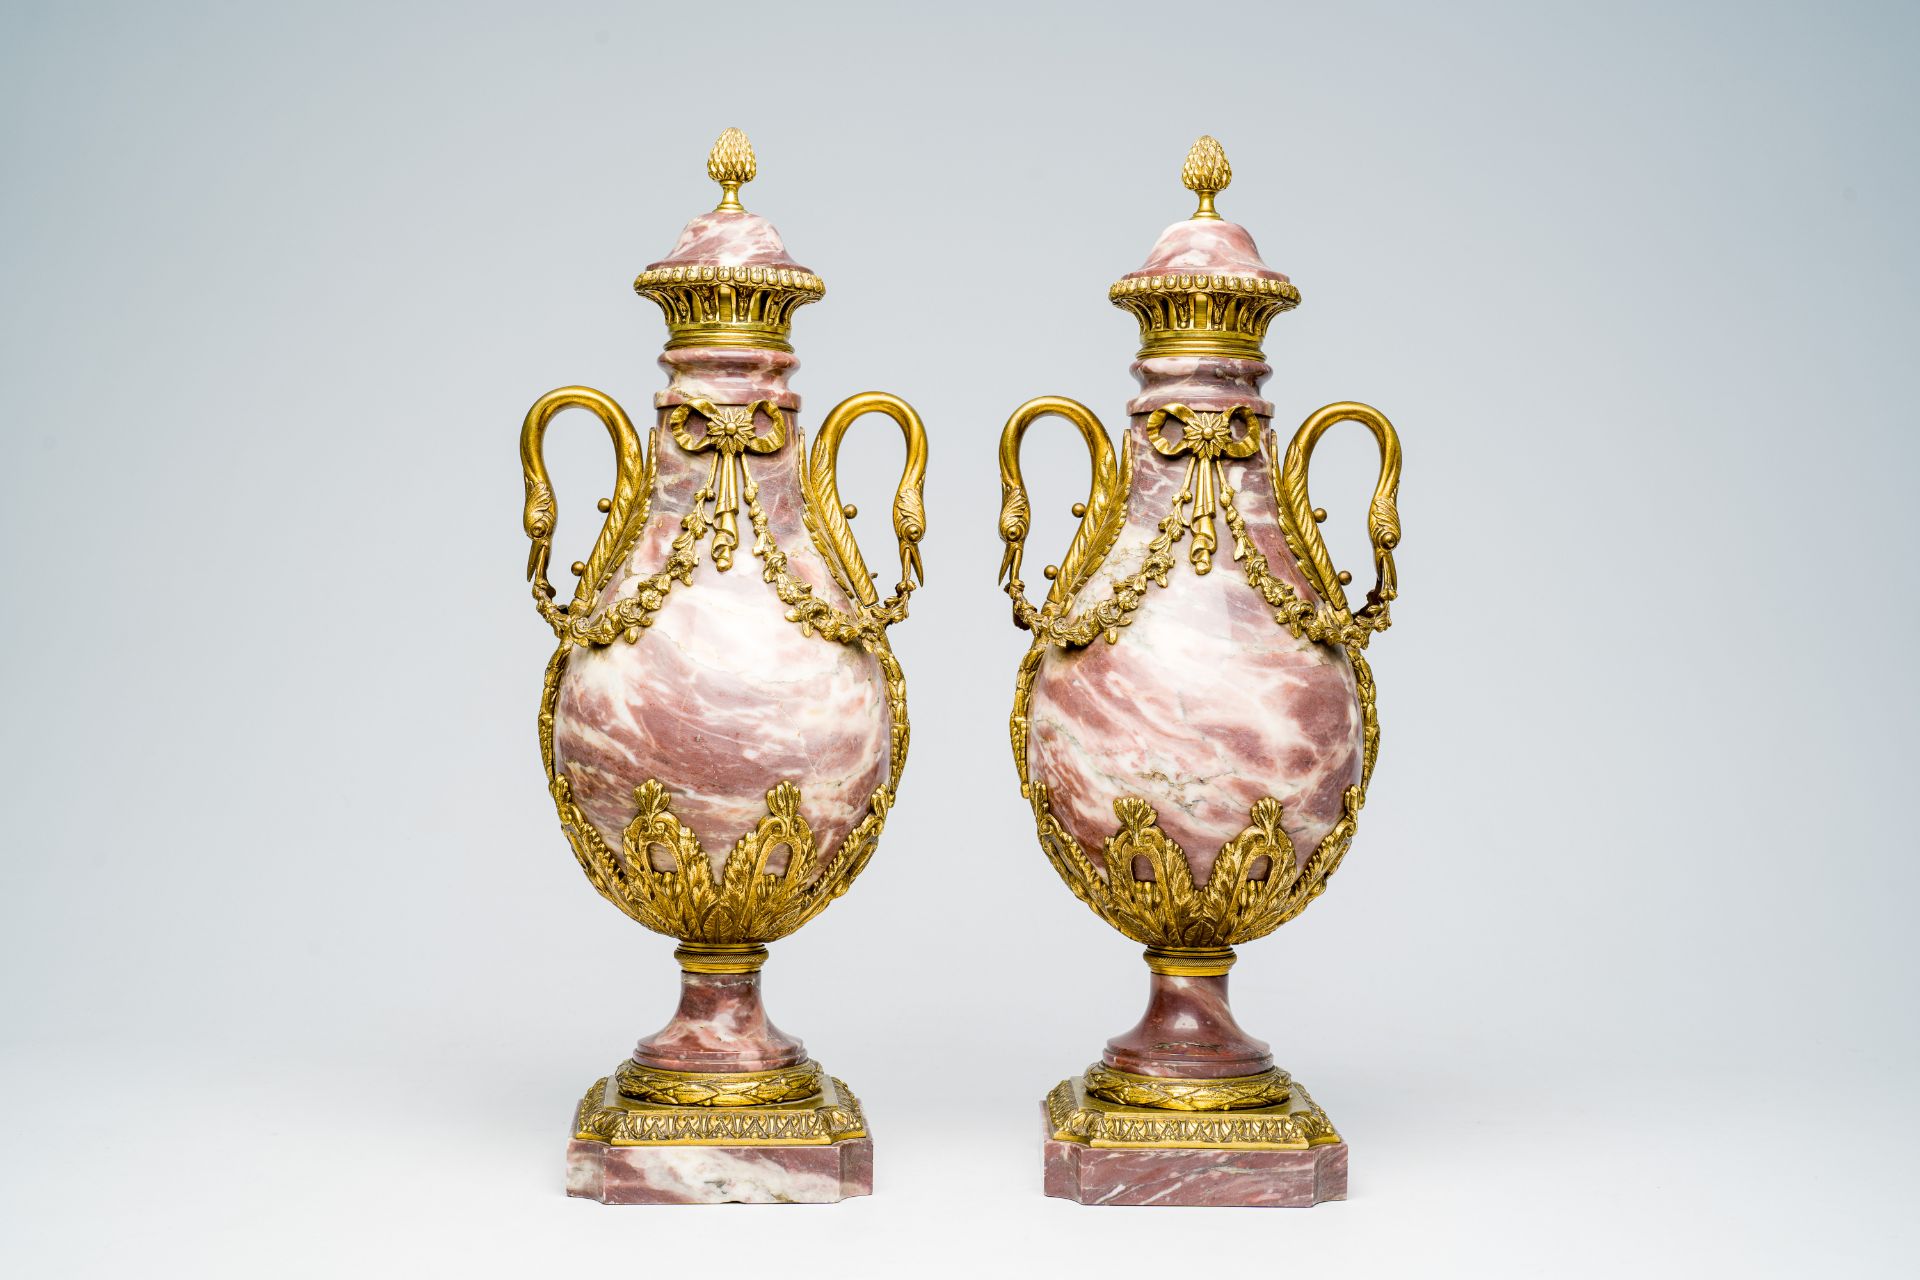 A pair of French bronze mounted Empire style marble cassolettes wit swan necks and floral design, 19